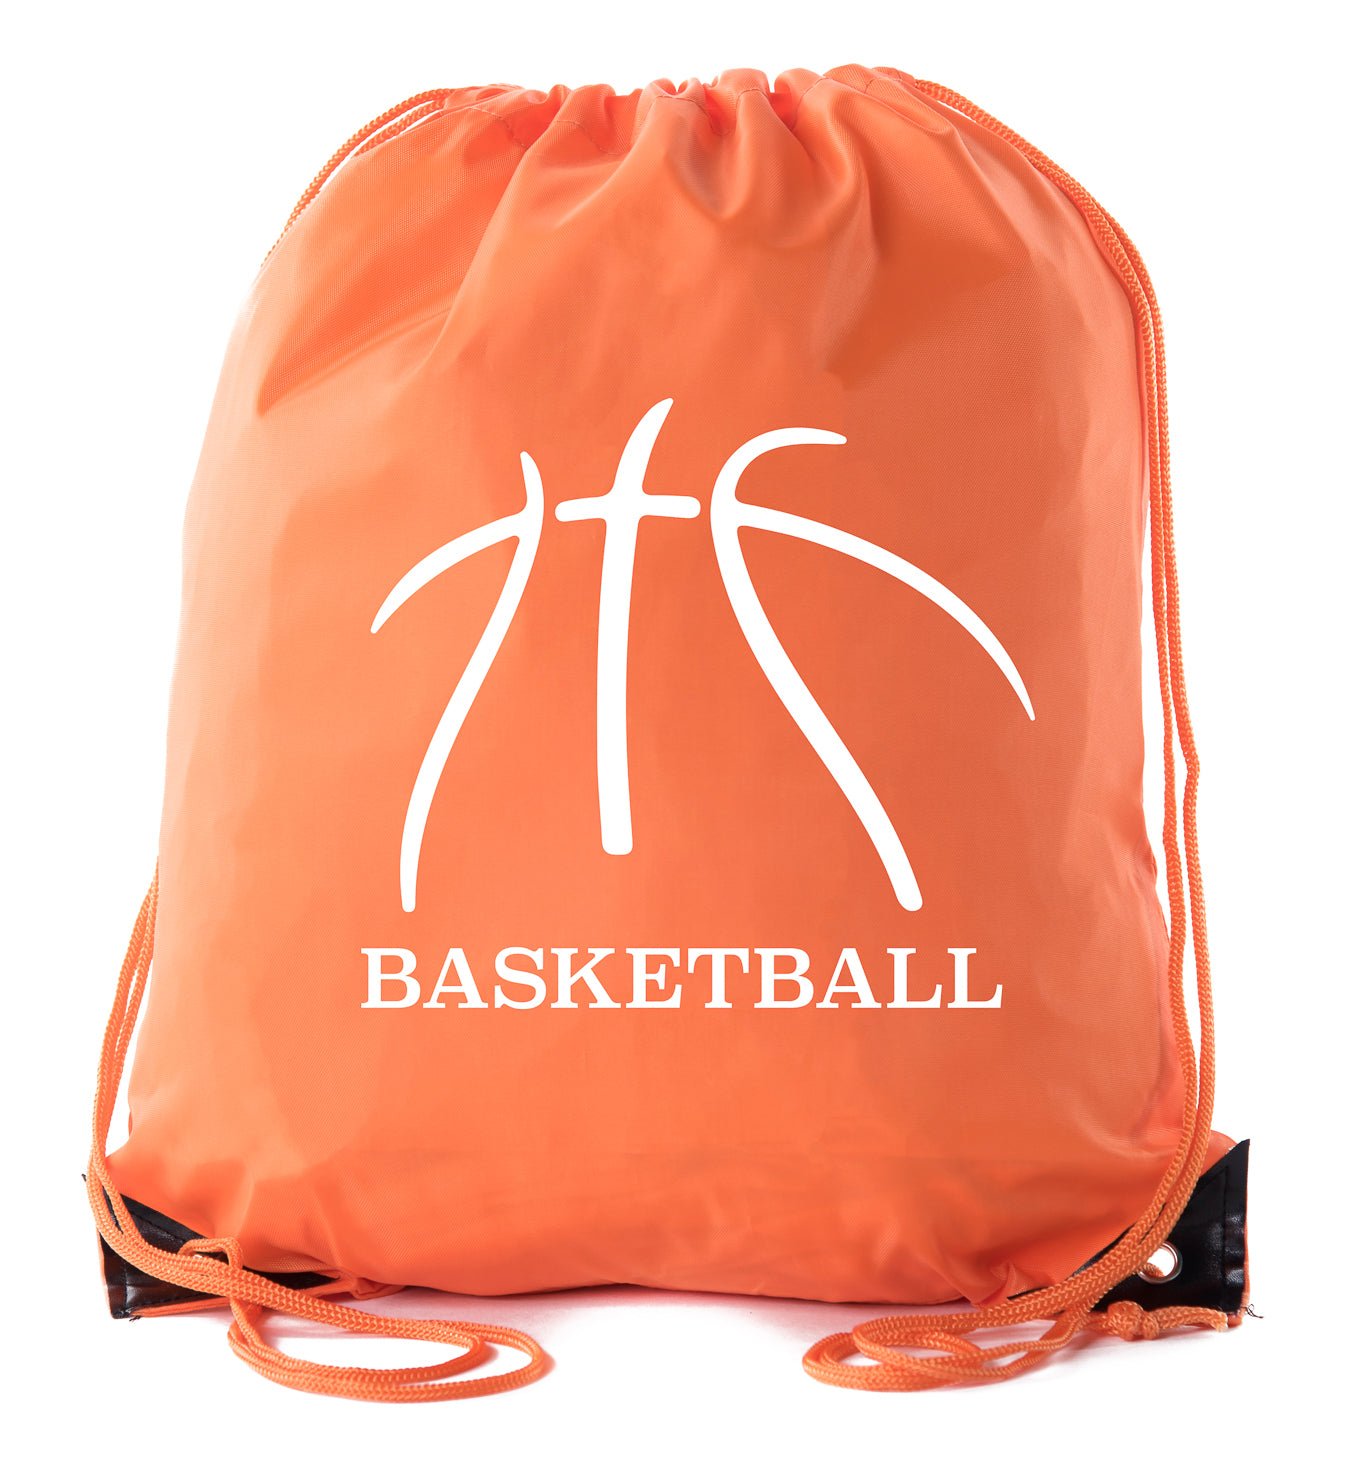 Accessory - Mato & Hash Basketball Drawstring Bags With 3,6, And 10 Pack Bulk Options - Outline